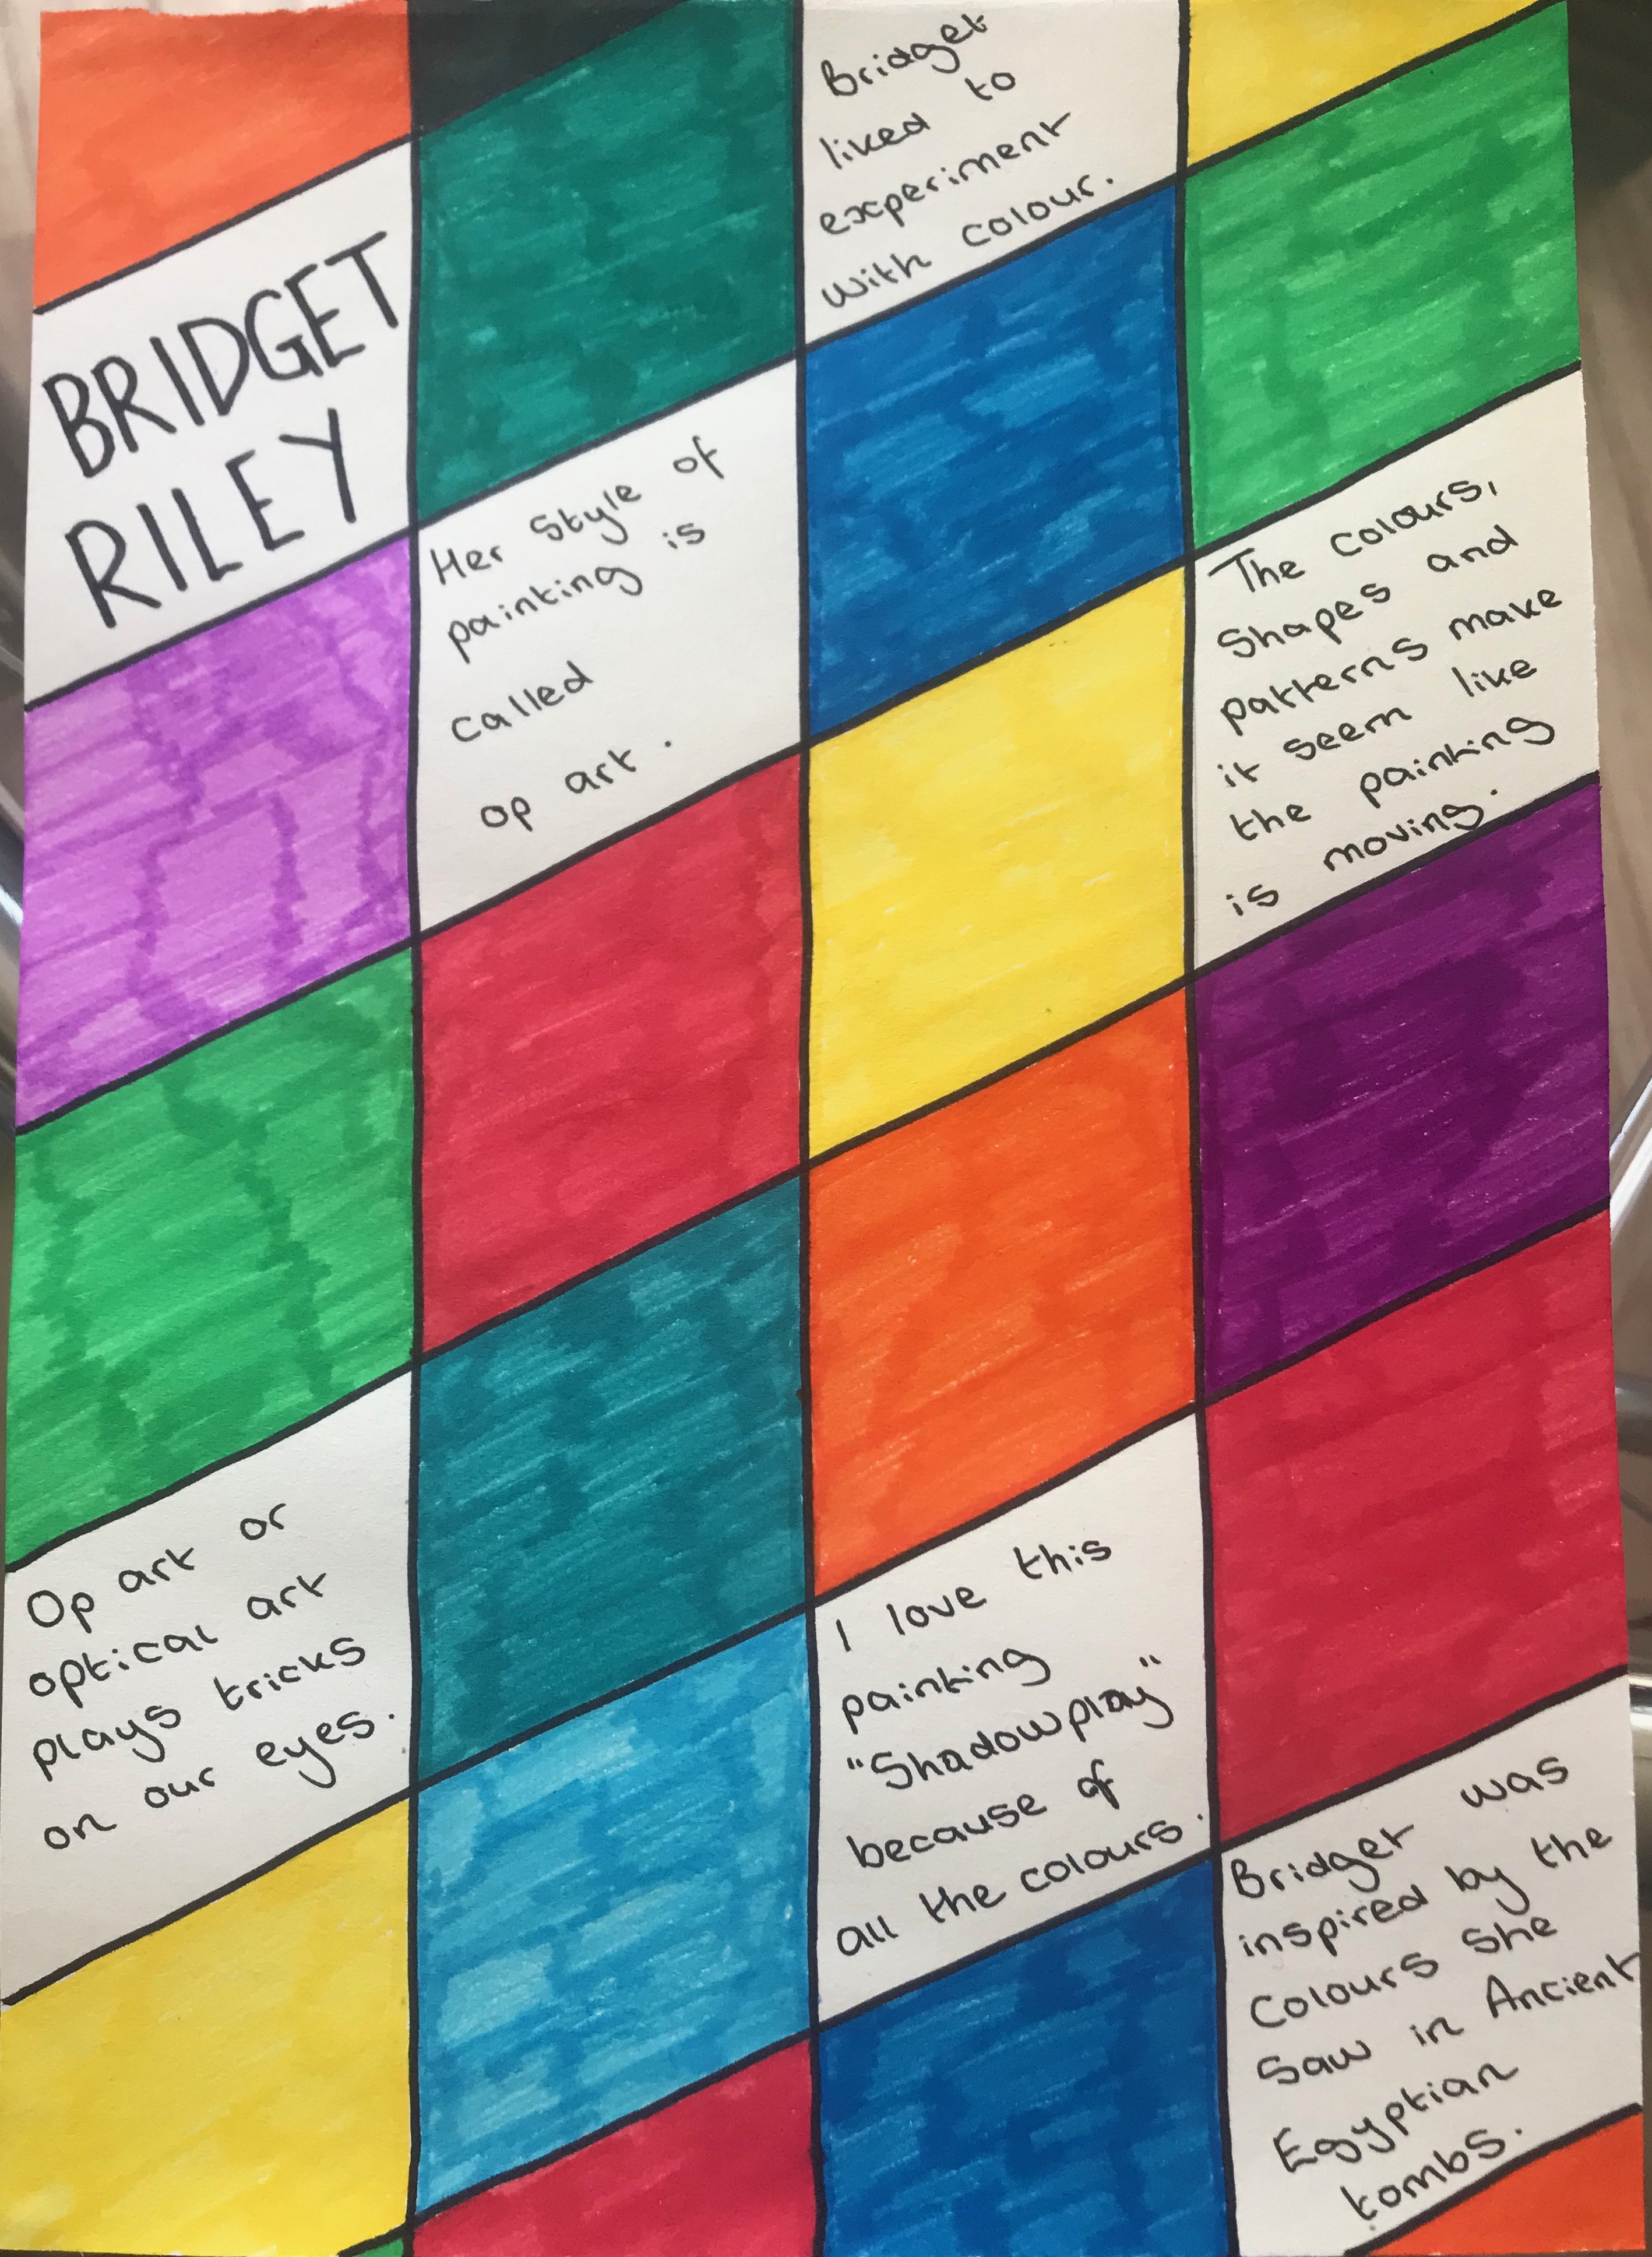 Poster showing information learnt about Bridget Riley